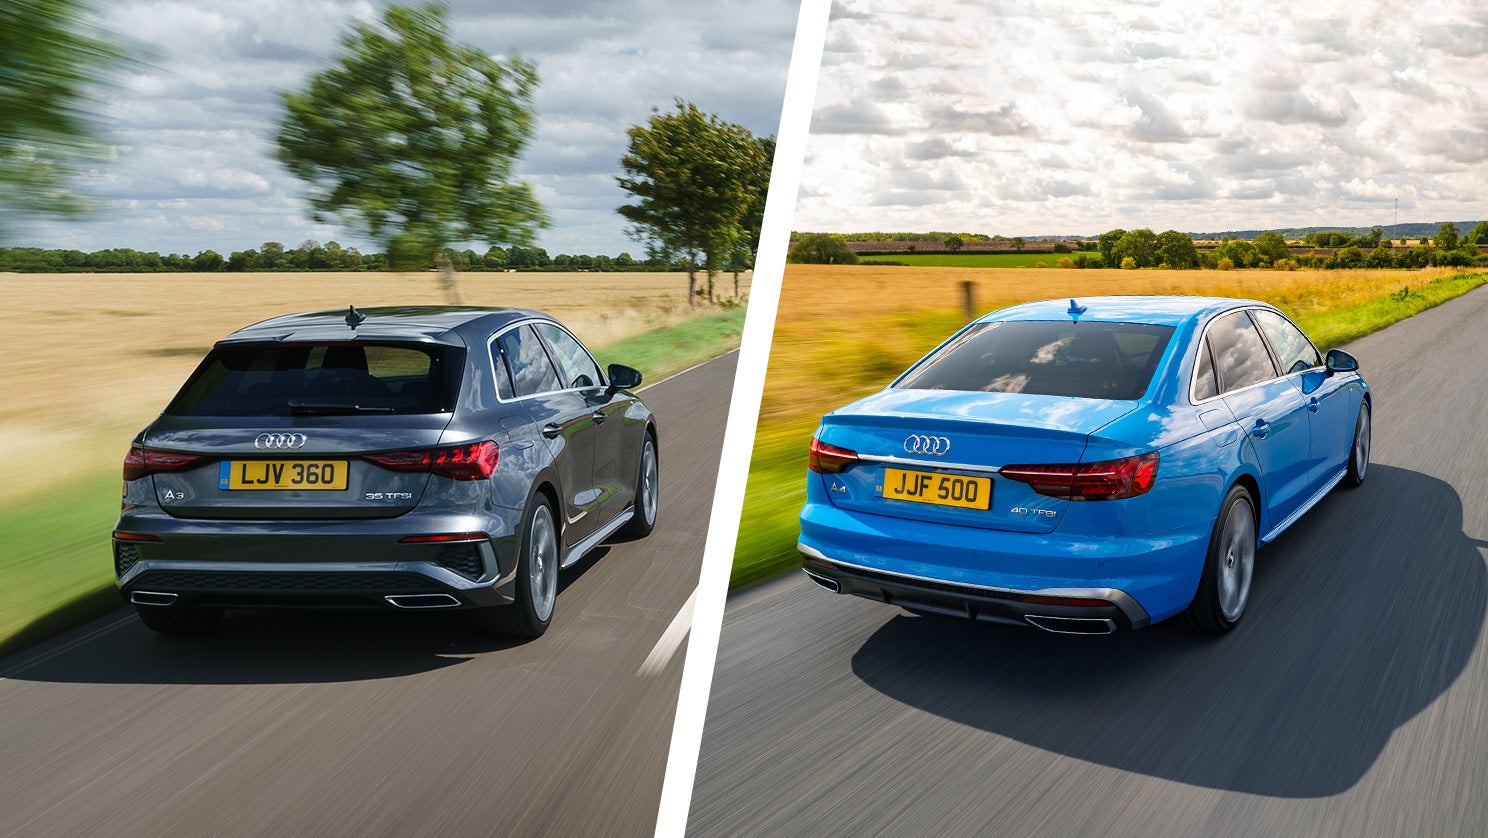 Audi A3 vs Audi A4 – which is best?